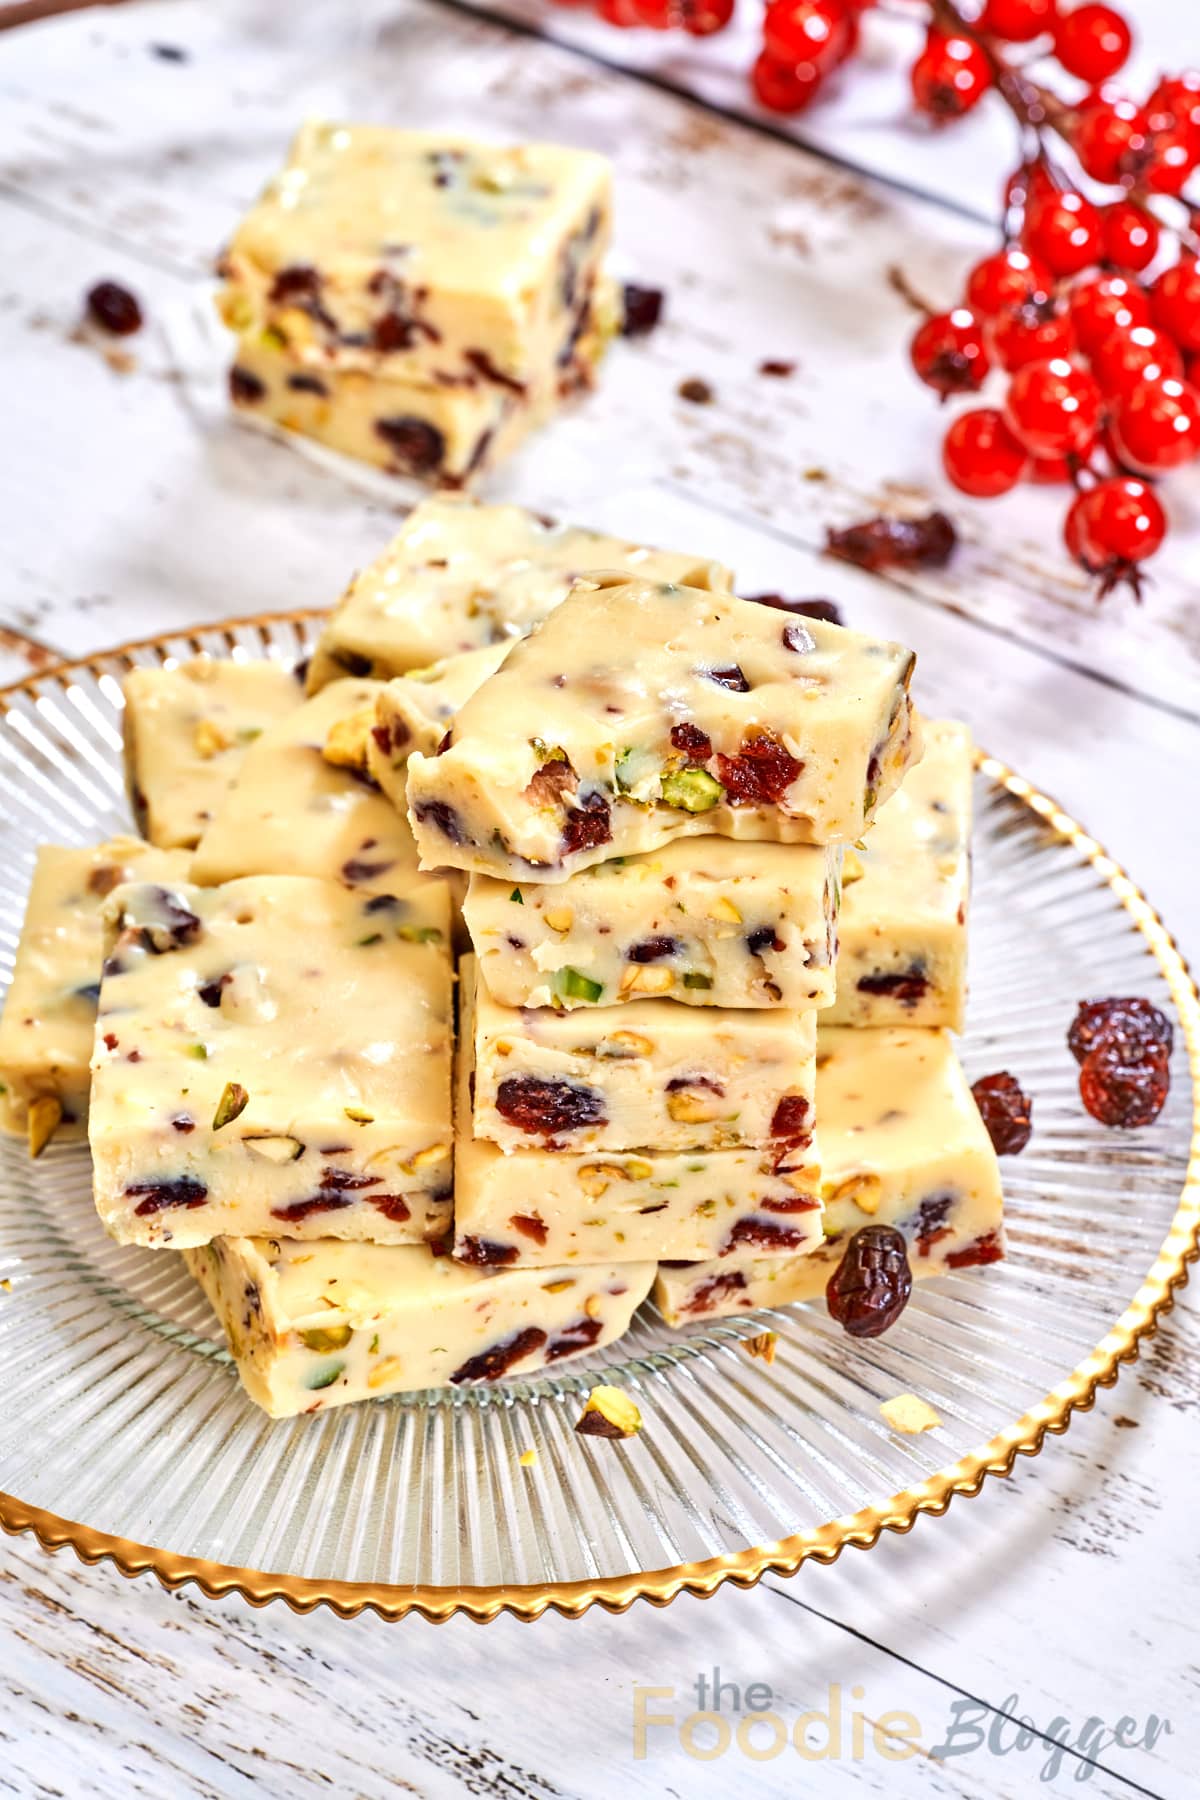 easy white chocolate fudge with pistachio and cranberry